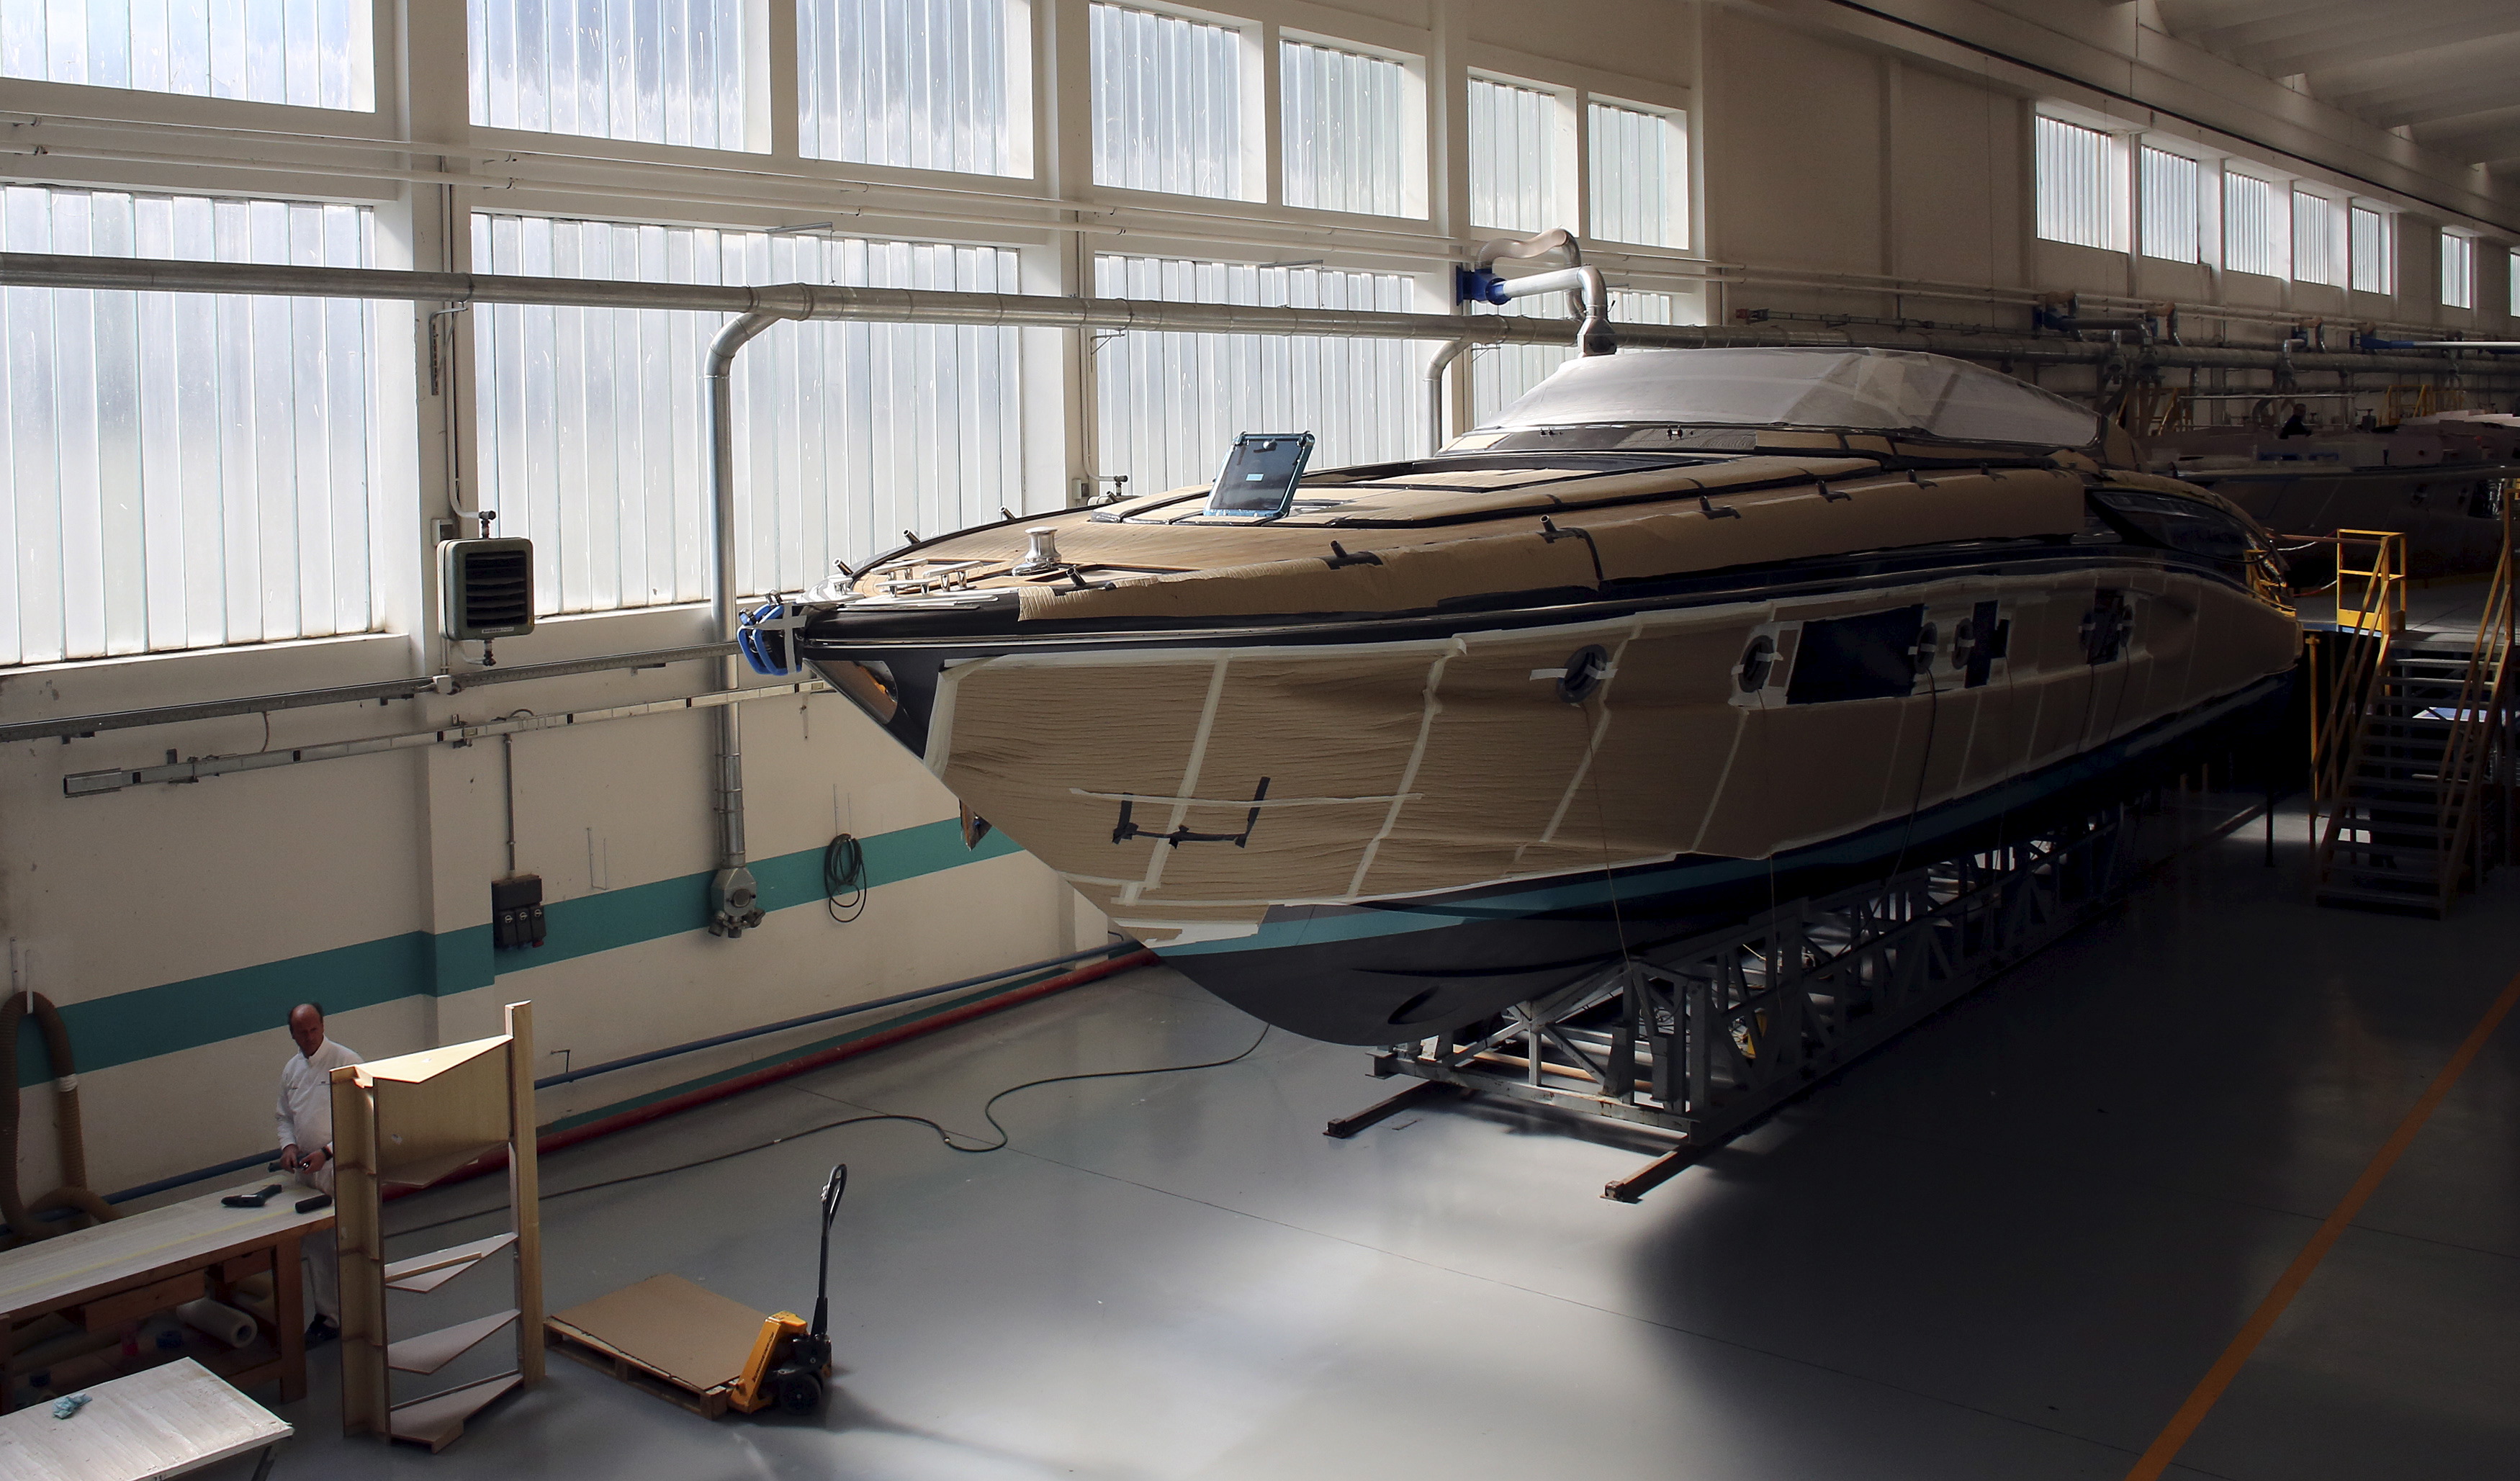 An employee works on a yacht at the Ferretti's shipyard in Sarnico